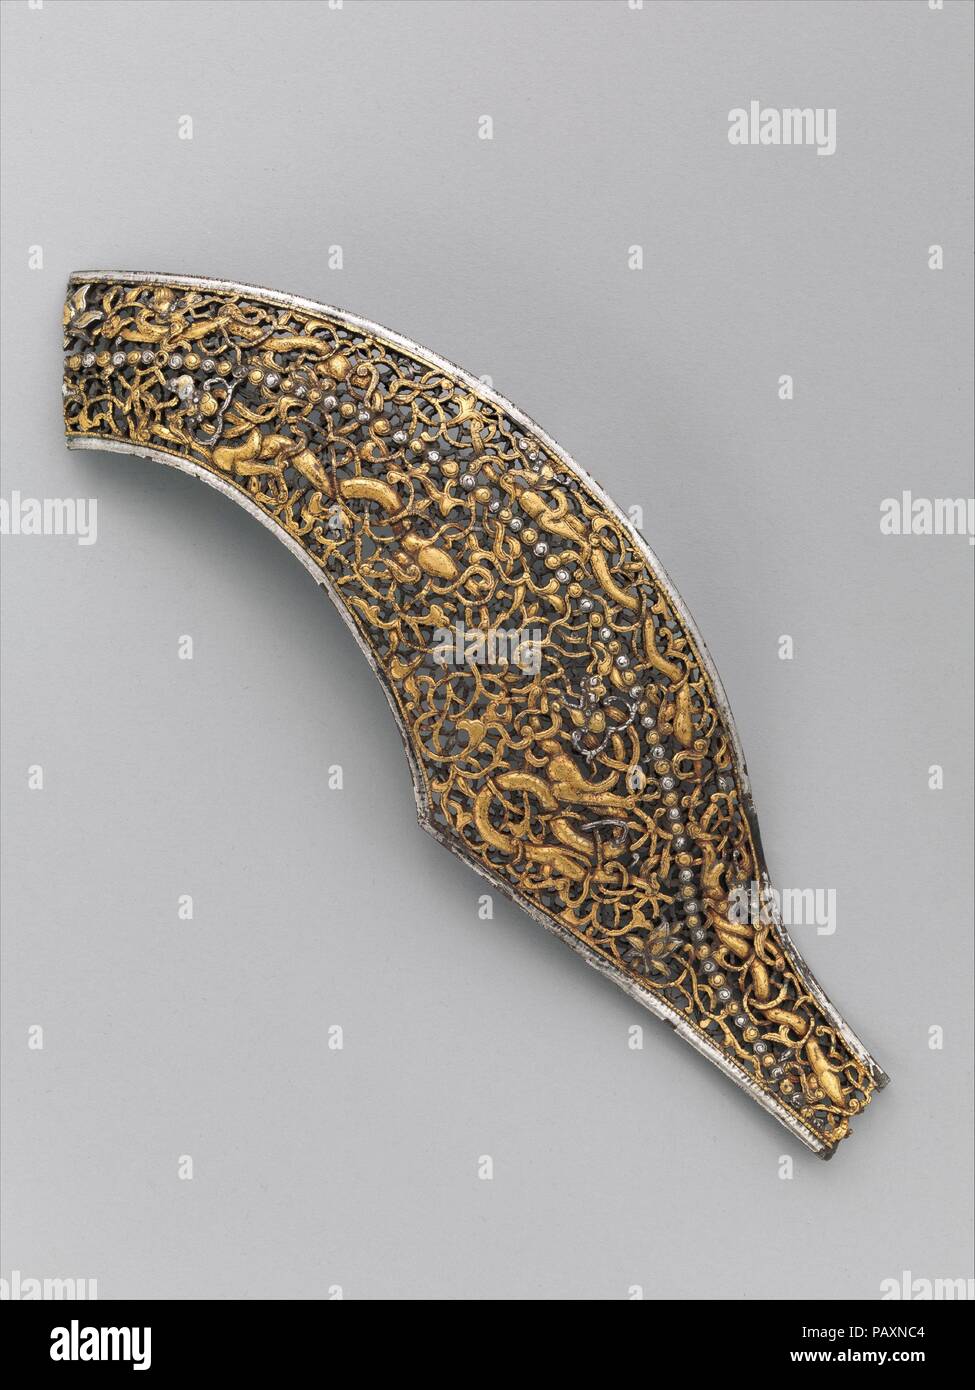 Right Half of a Cantle Plate from a Saddle. Culture: Tibetan or Chinese. Dimensions: H. 8 1/4 in. (21 cm); W. 6 1/4 in. (15.9 cm); Wt. 5 oz. (141.7 g). Date: 16th-18th century. Museum: Metropolitan Museum of Art, New York, USA. Stock Photo